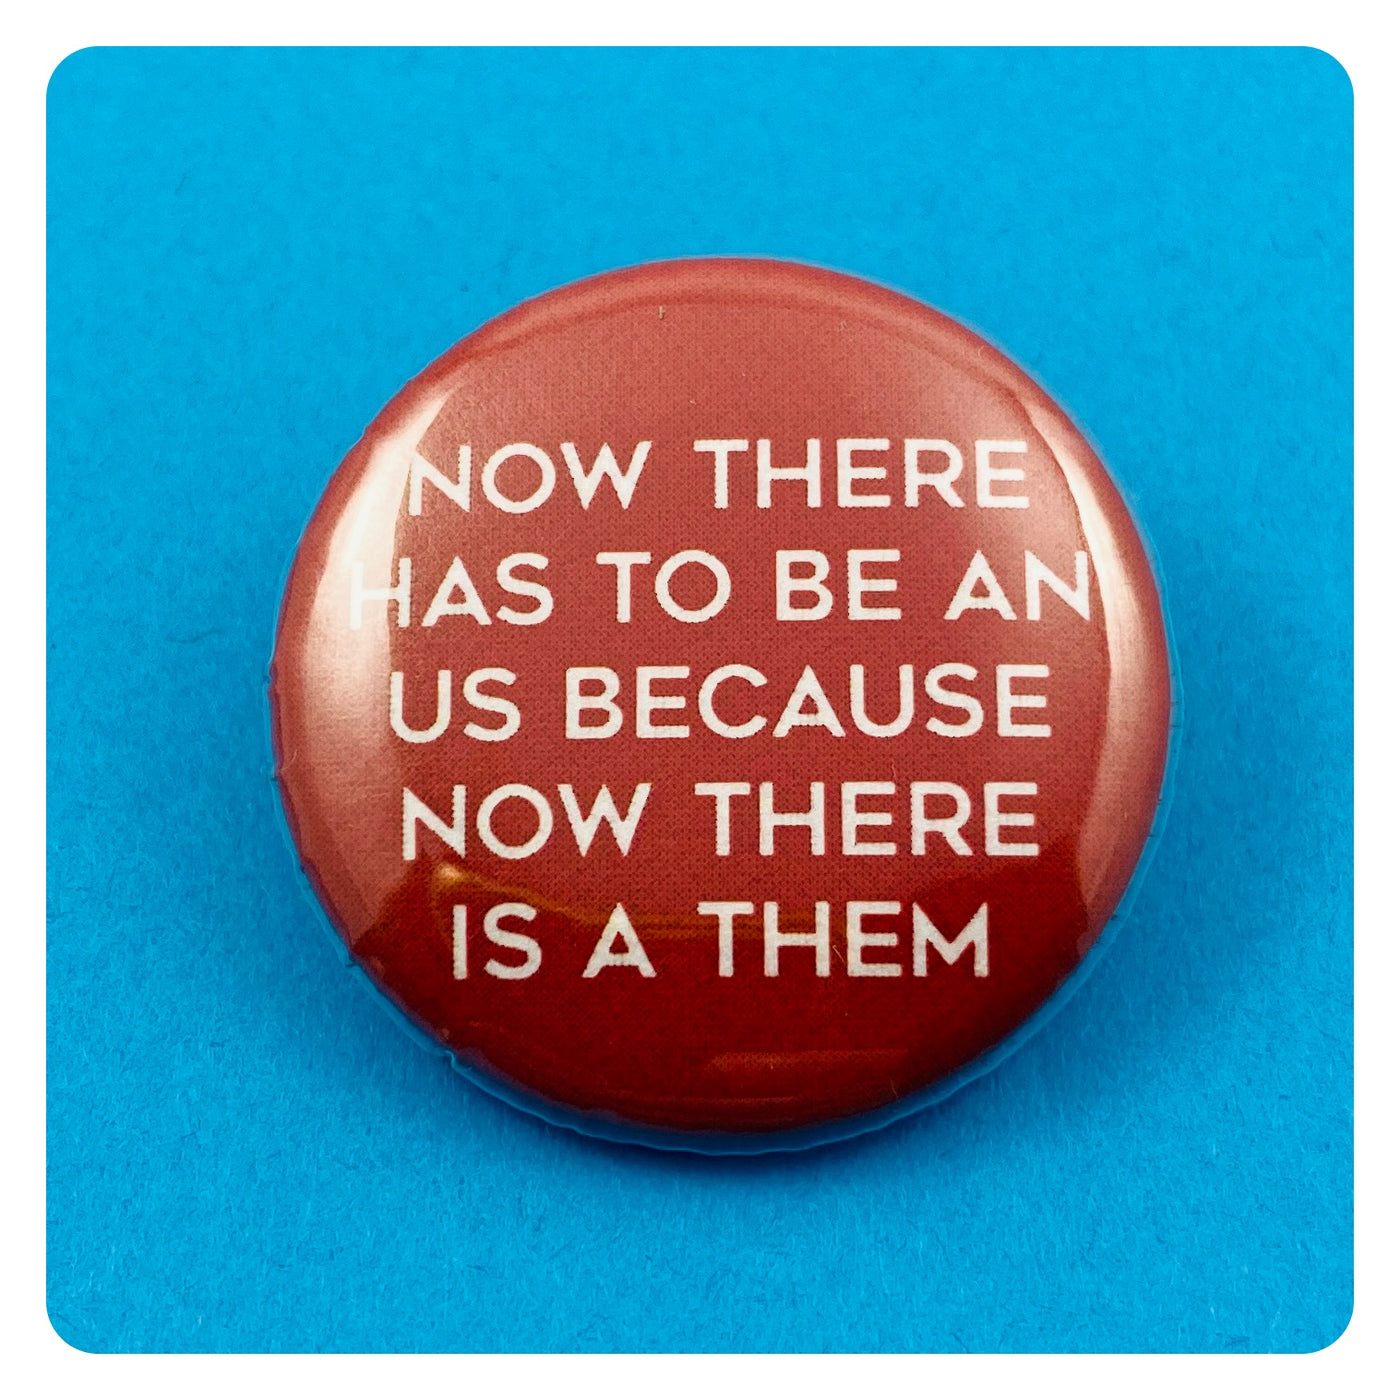 Handmaid's Tale Button Collection